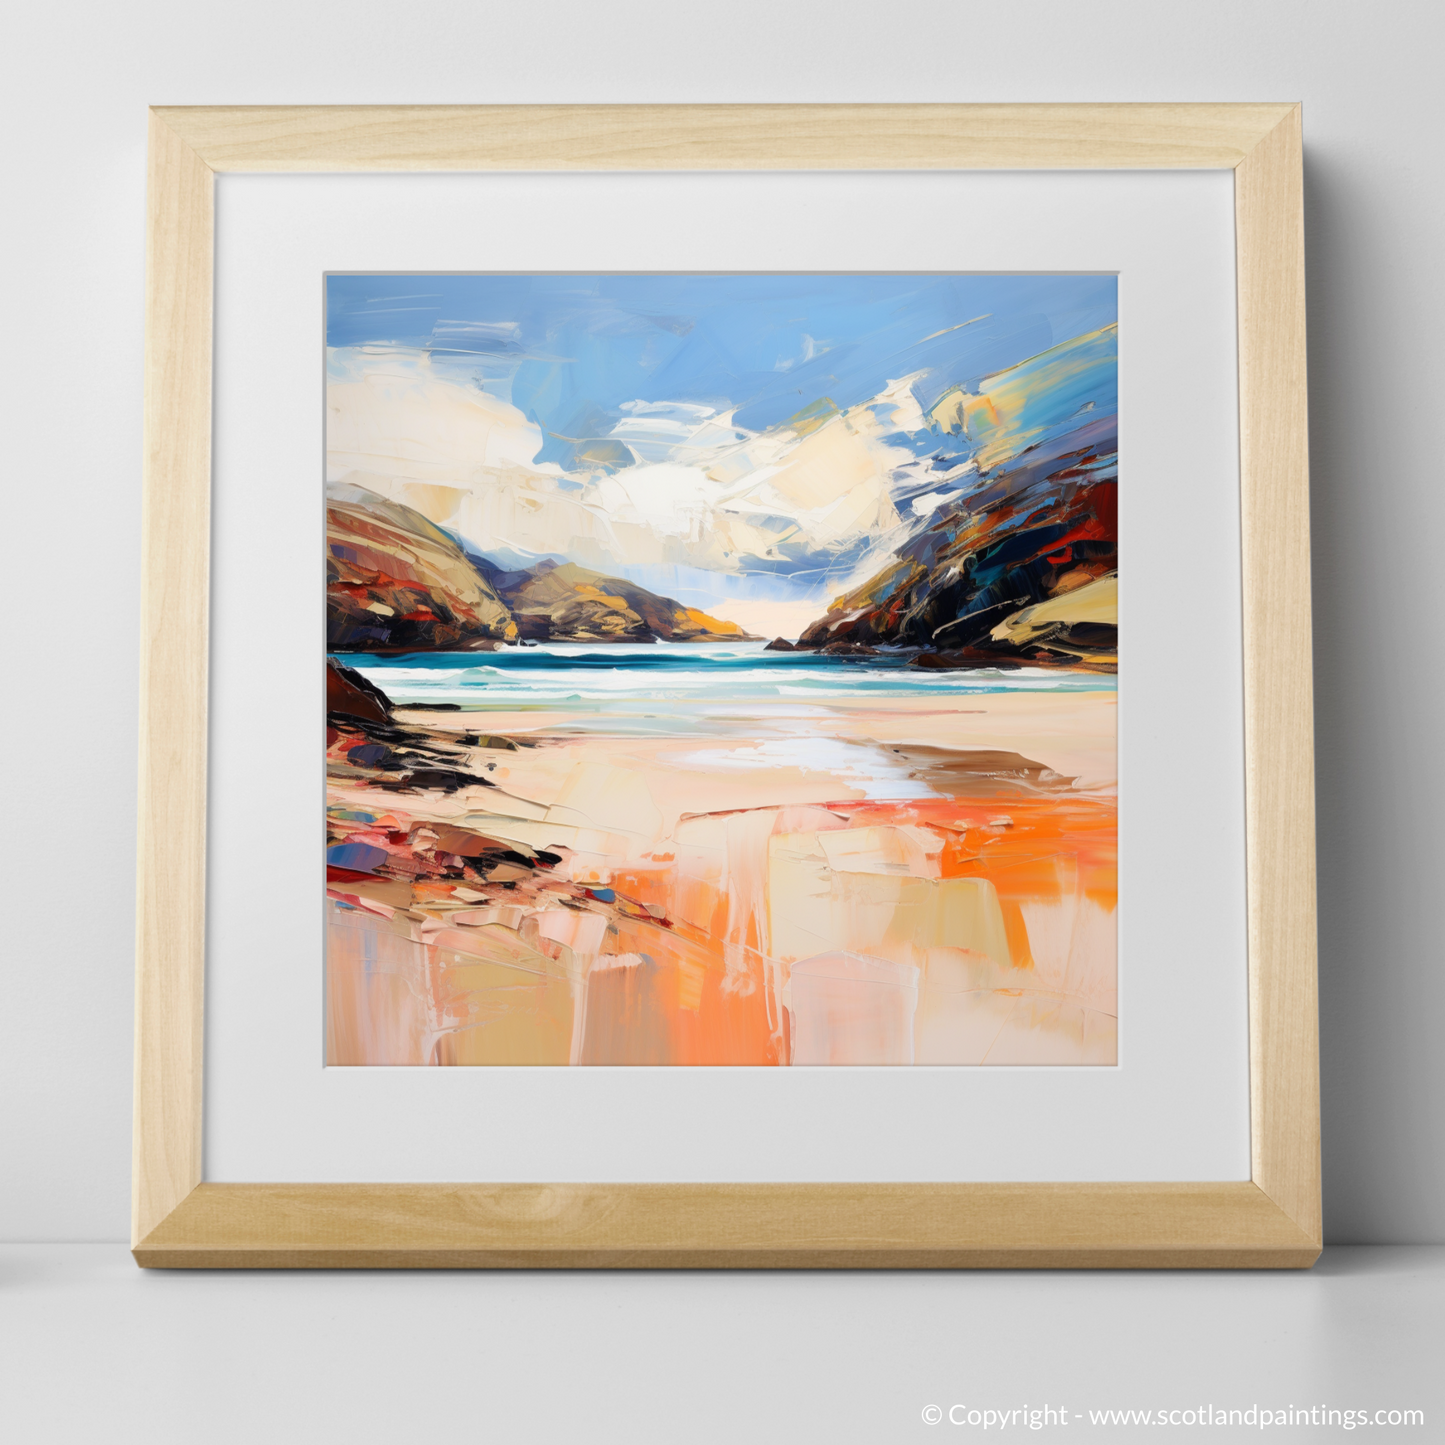 Art Print of Sandwood Bay, Sutherland with a natural frame